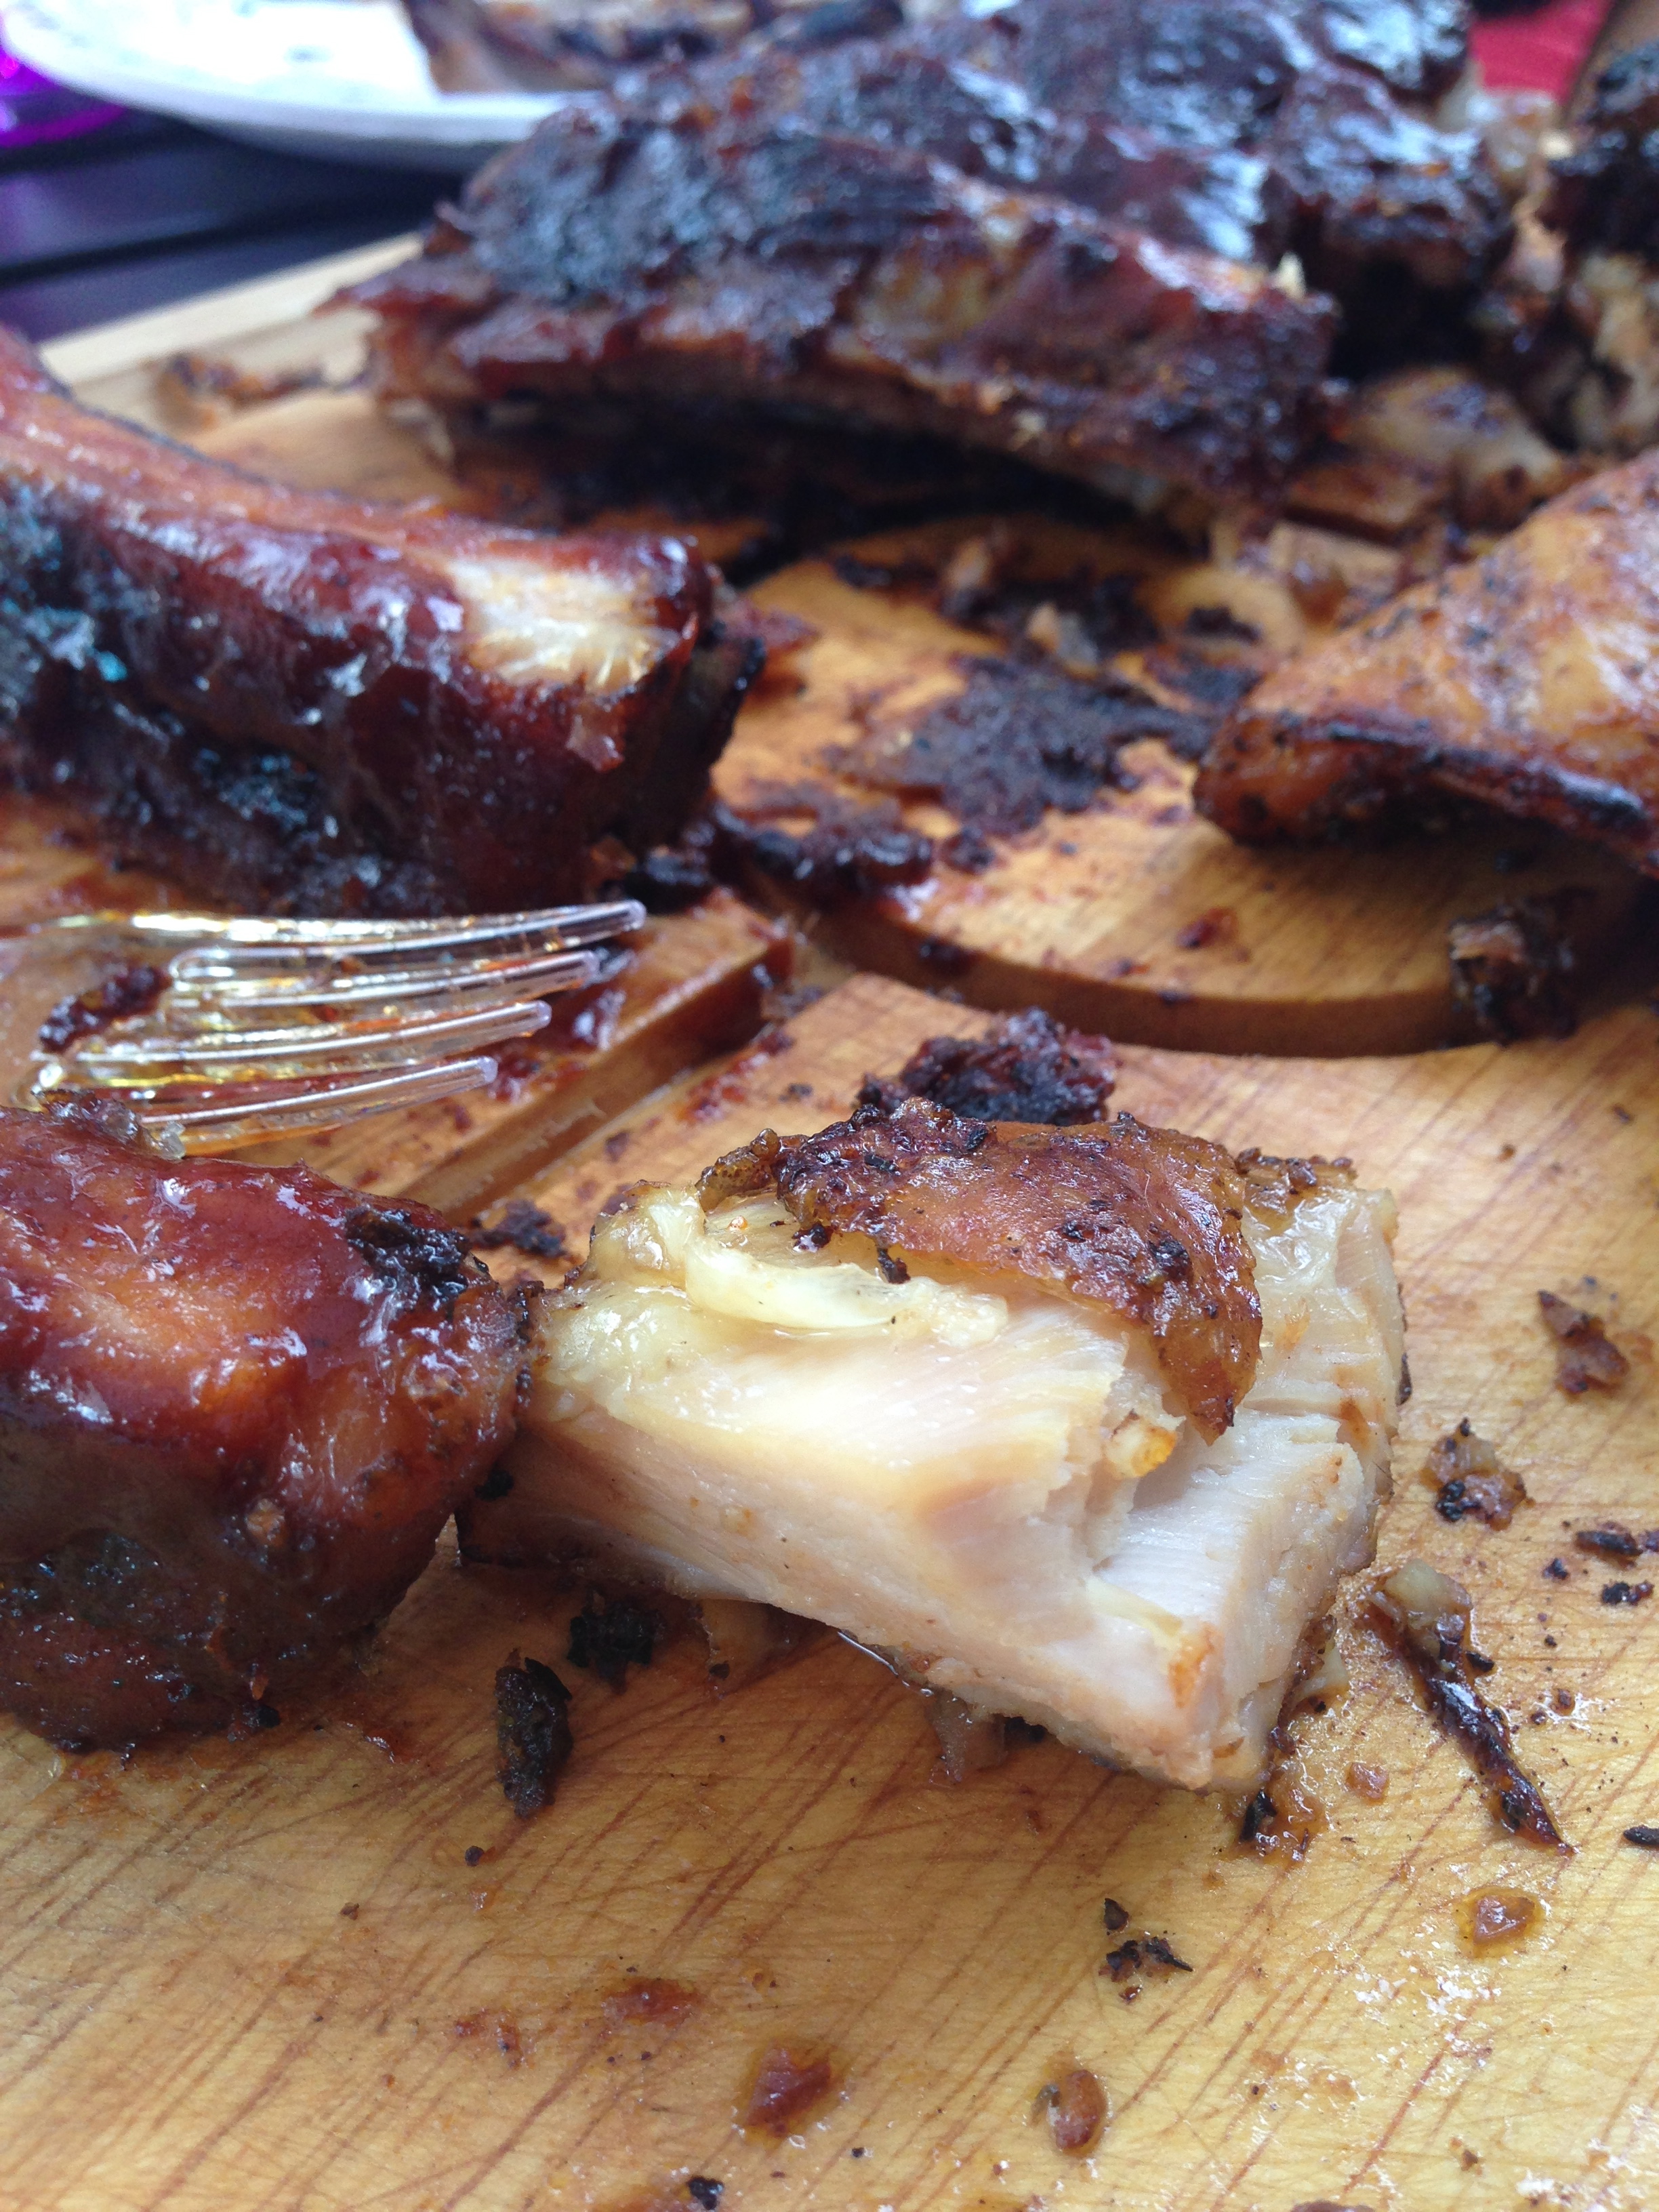 A closer look at the smoked chicken and its bark.